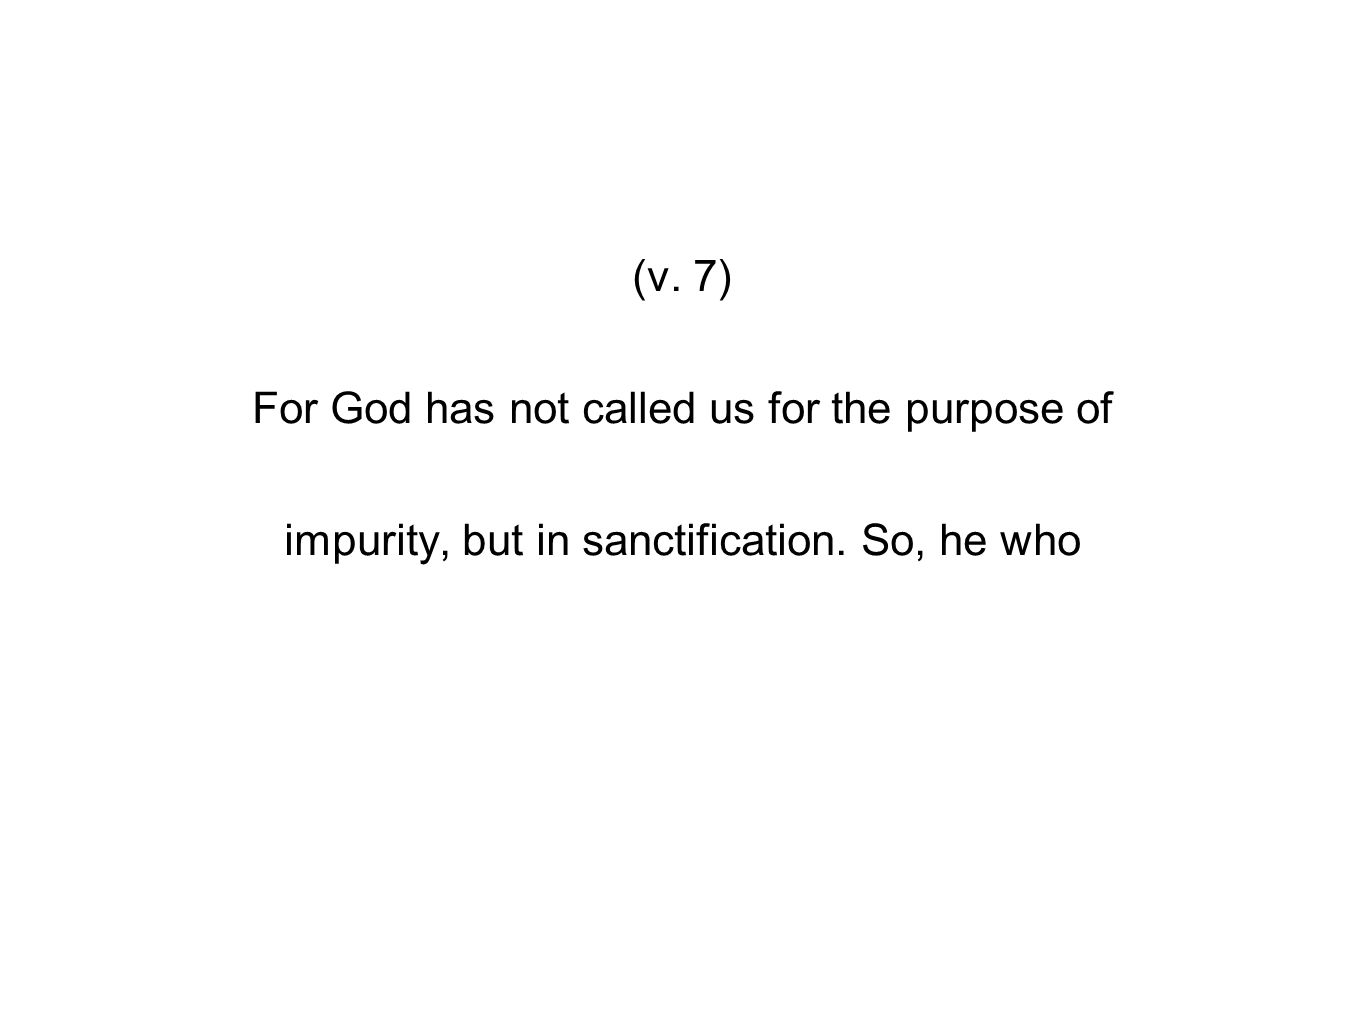 (v. 7) For God has not called us for the purpose of impurity, but in sanctification. So, he who